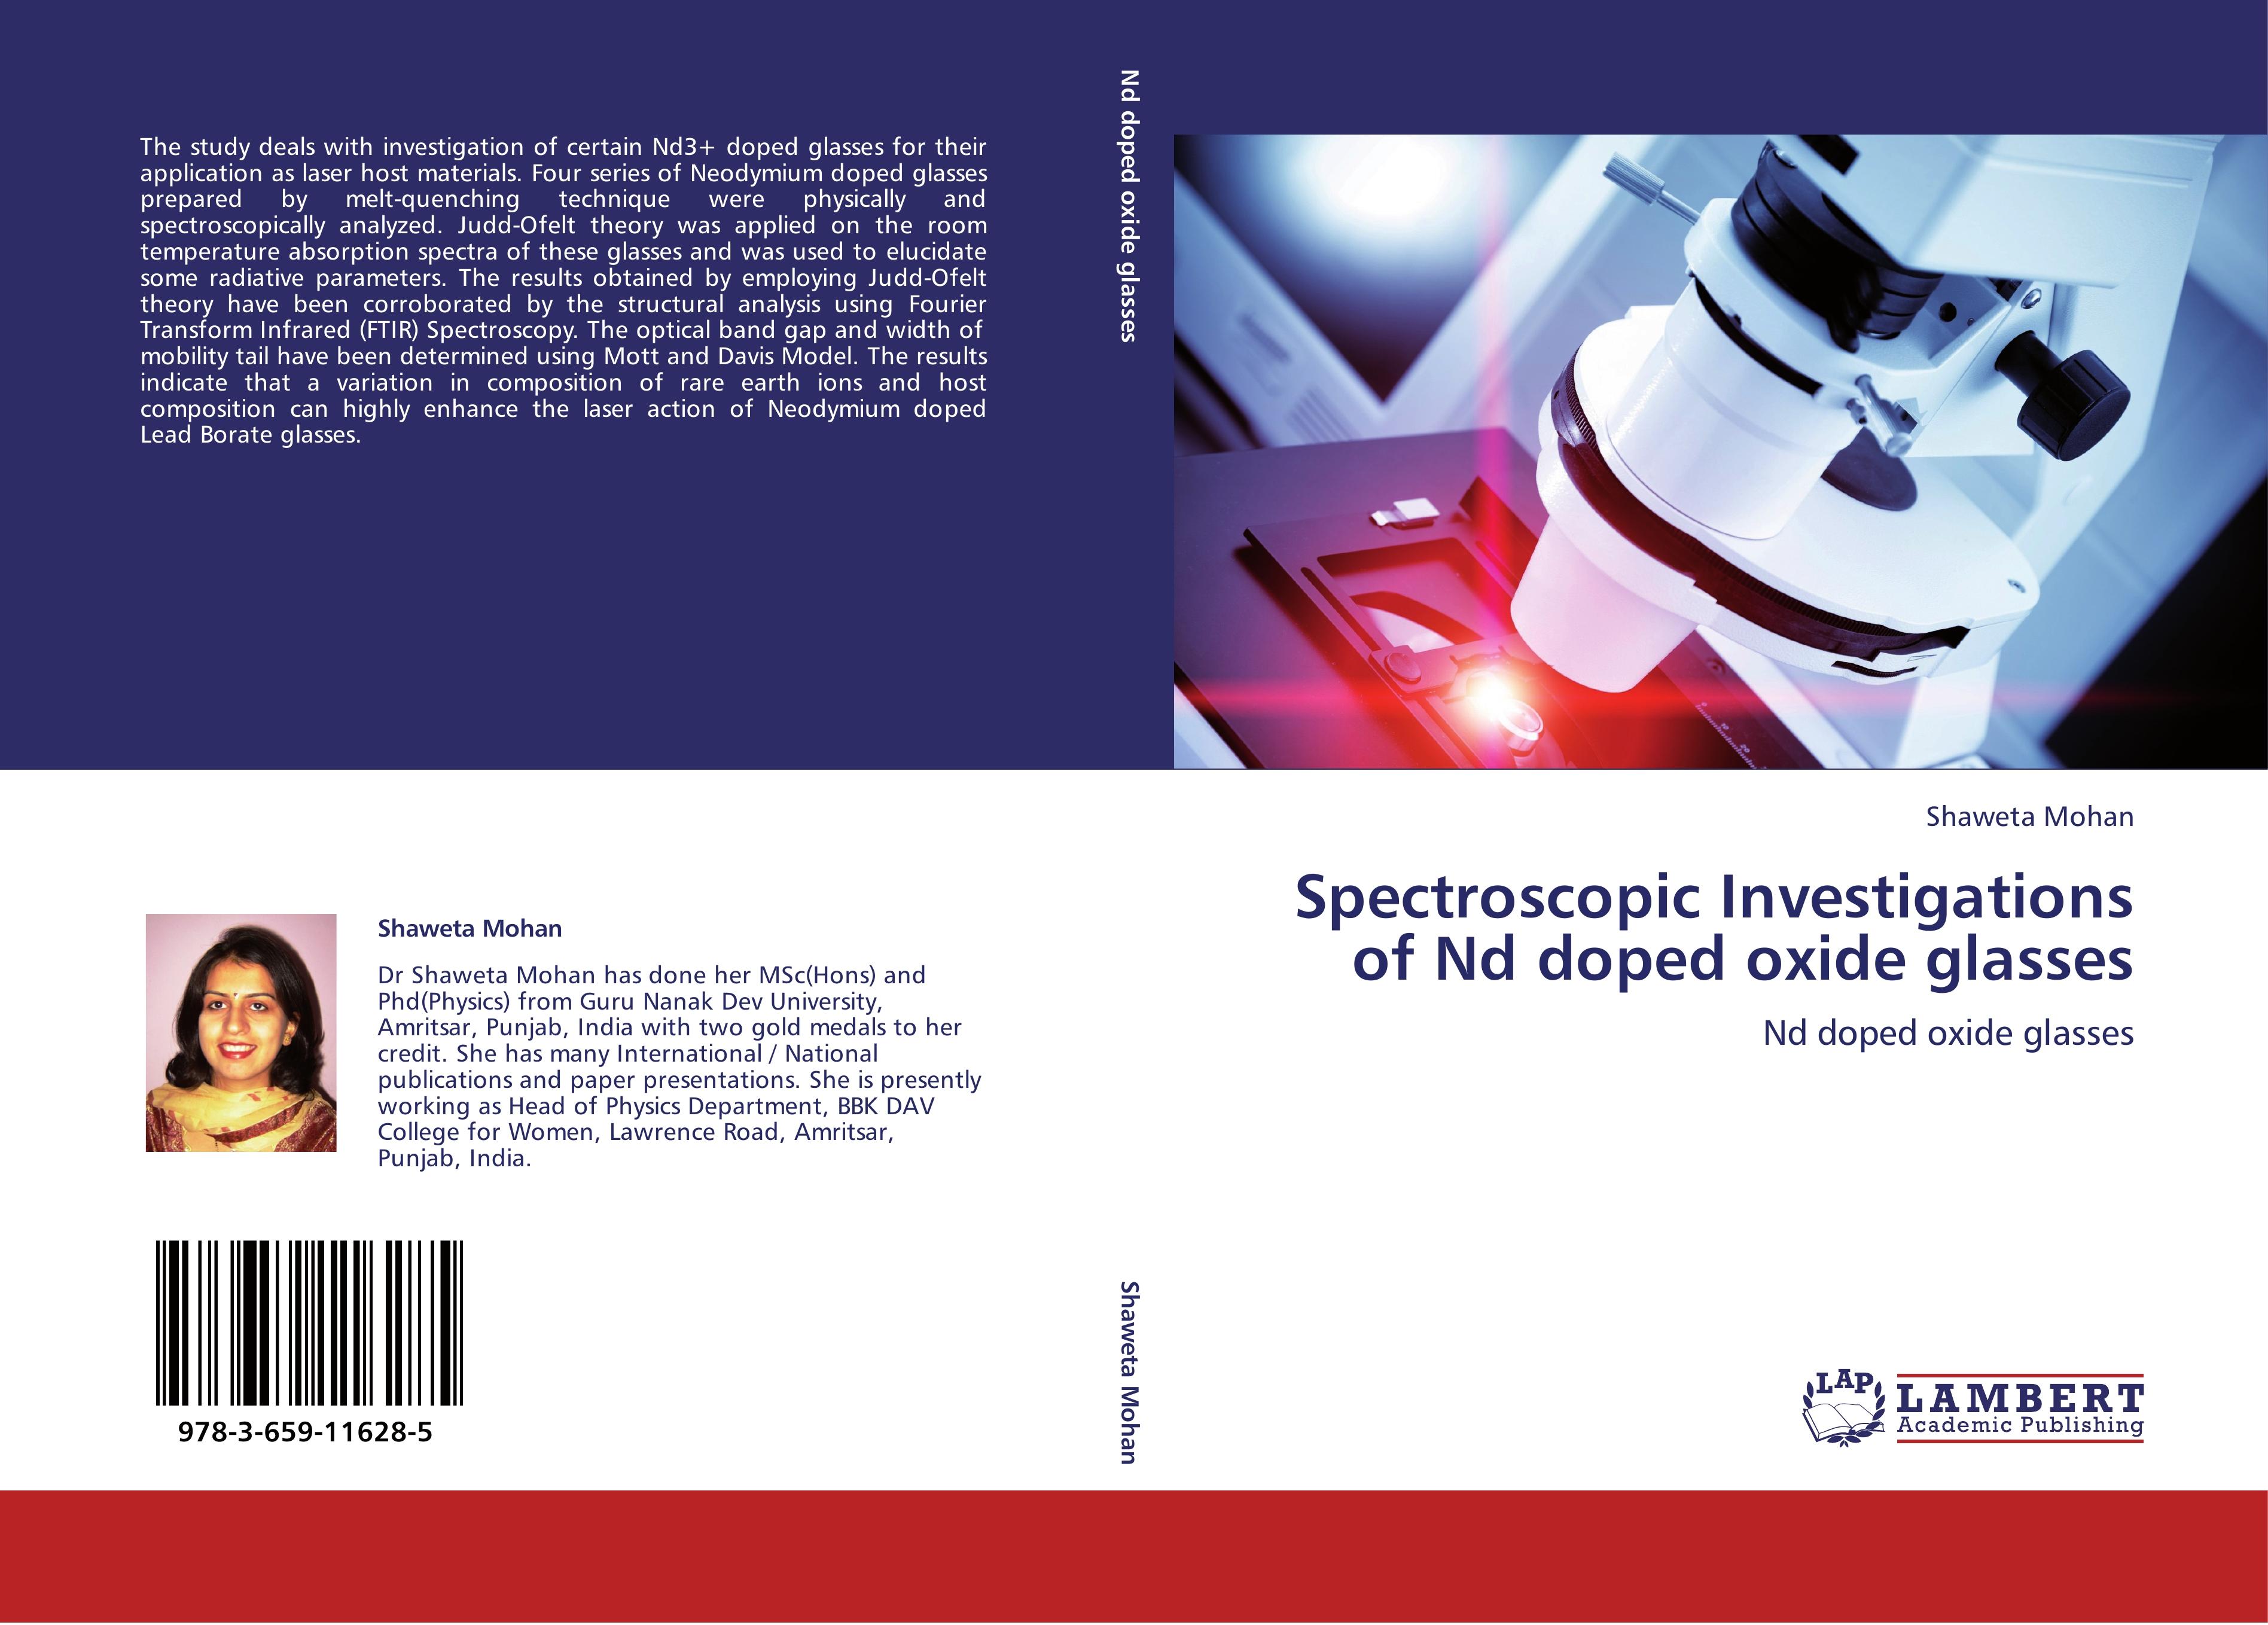 Spectroscopic Investigations of Nd doped oxide glasses - Shaweta Mohan